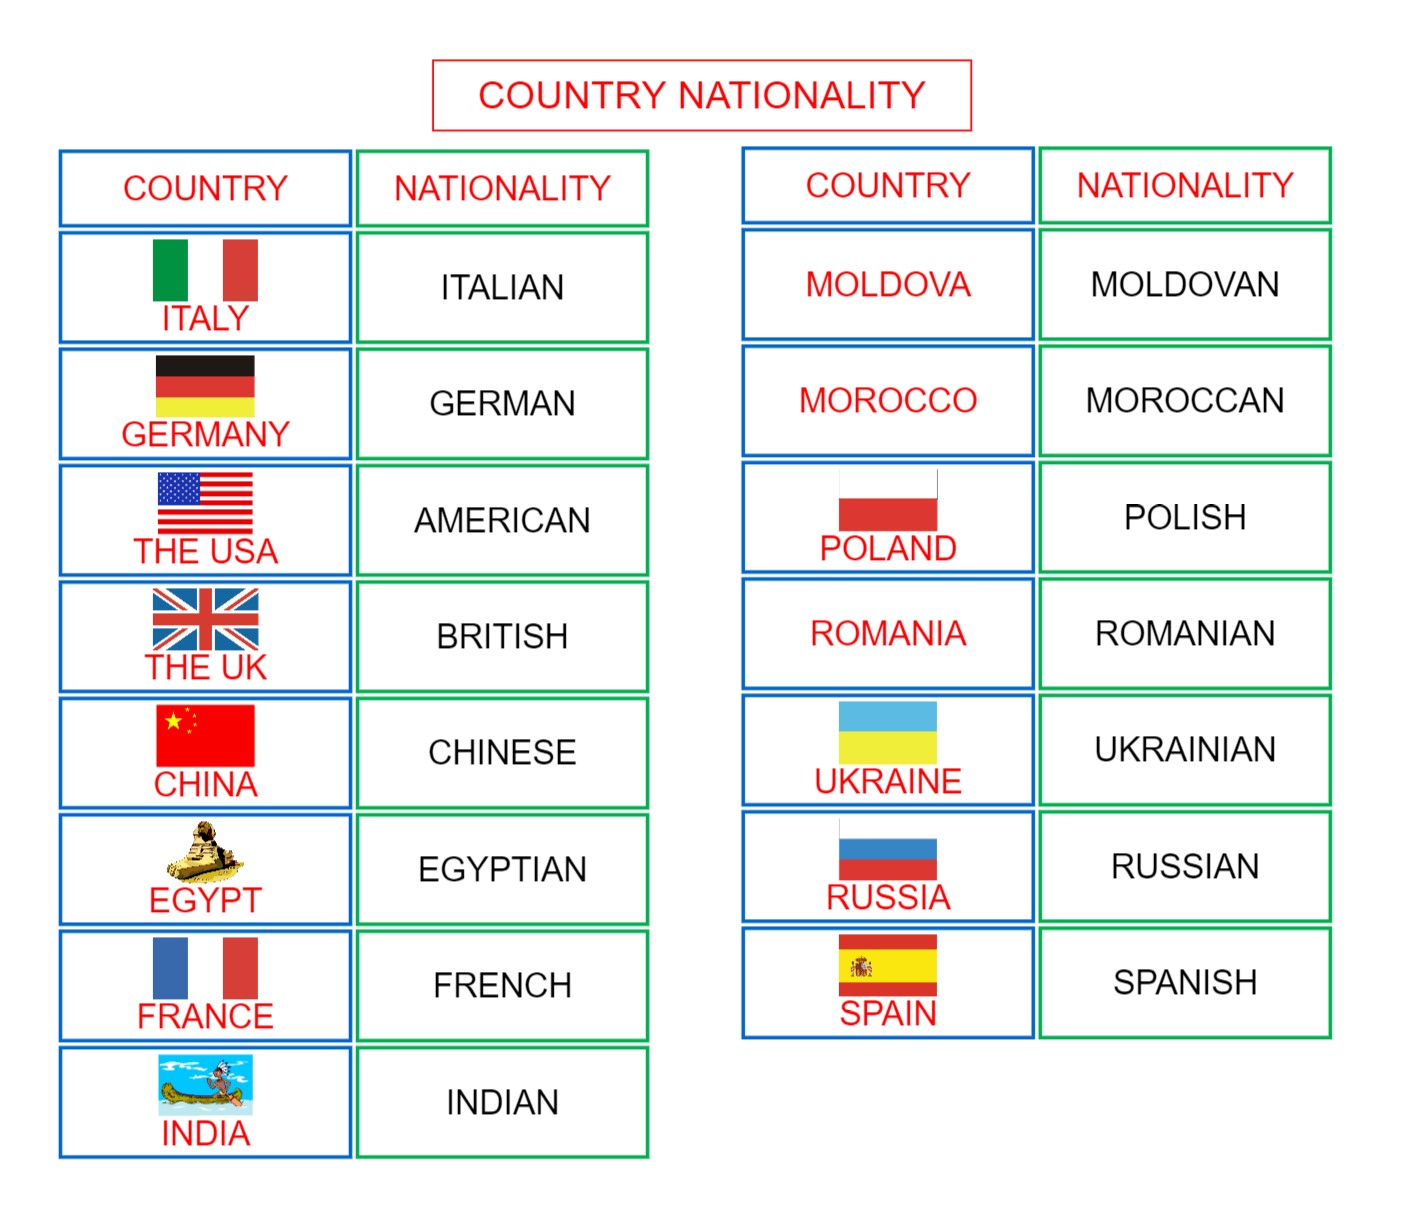 Country Nationality